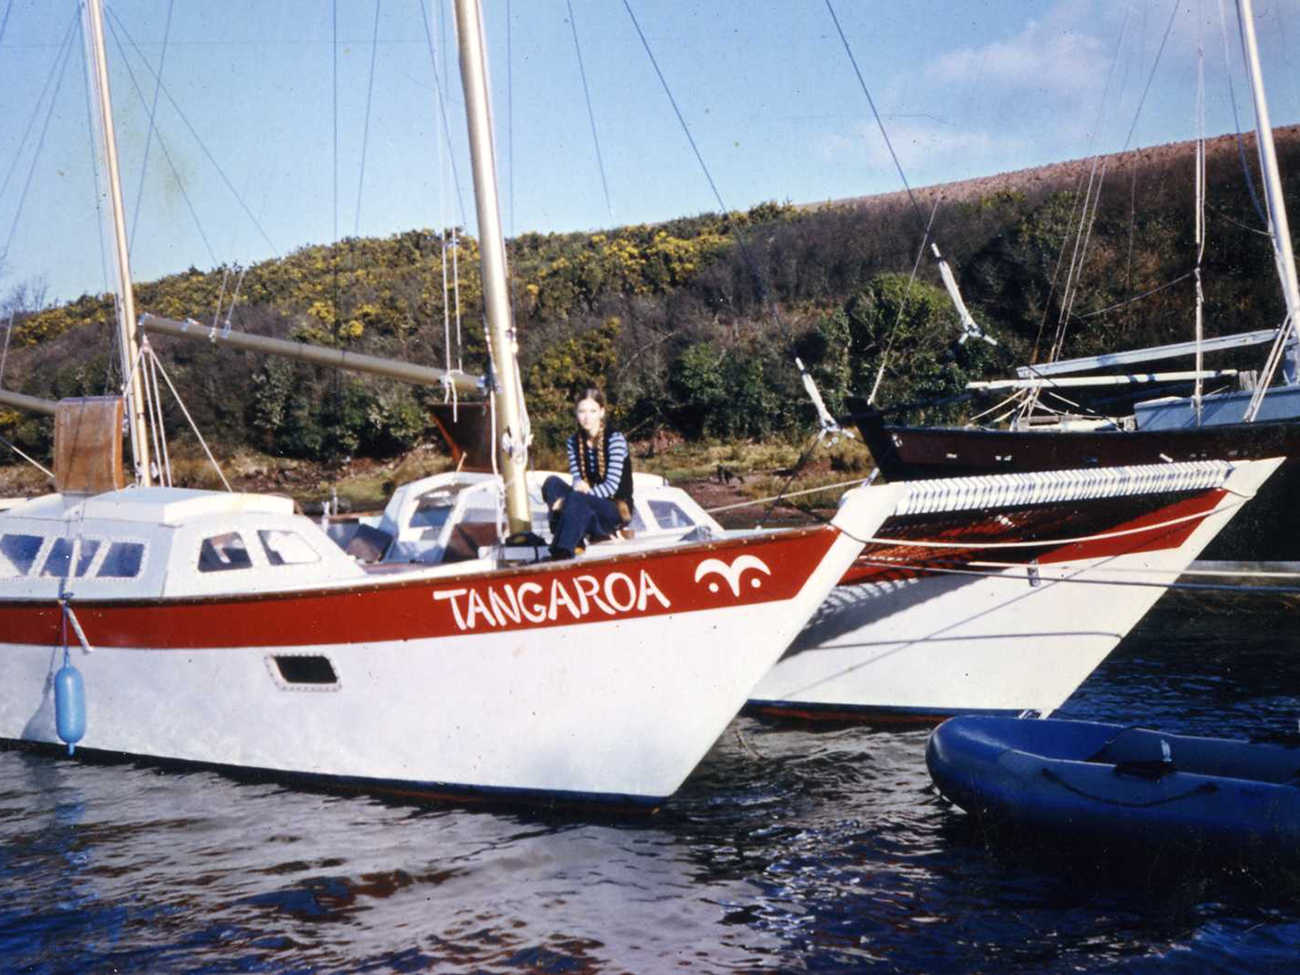 Double canoe catamaran, one person aboard, surrounded by other boats